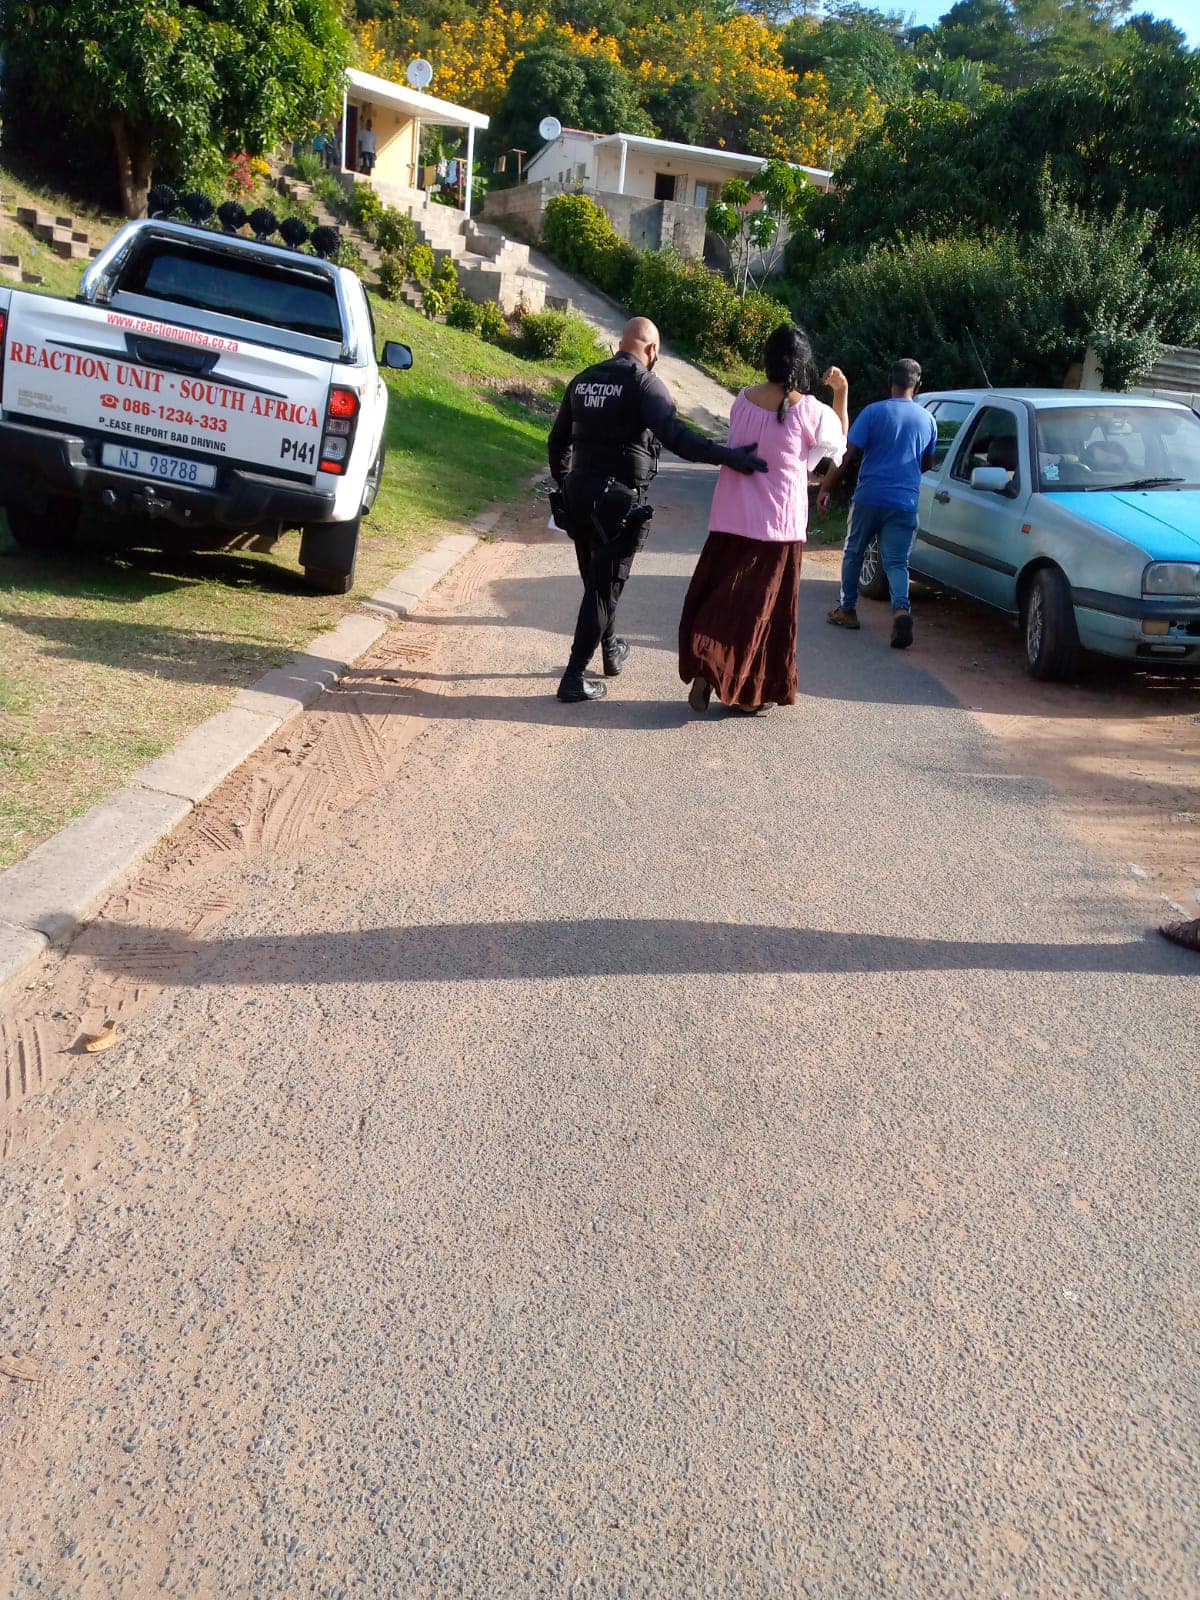 Elderly woman attacked by a dog in Trenance Park